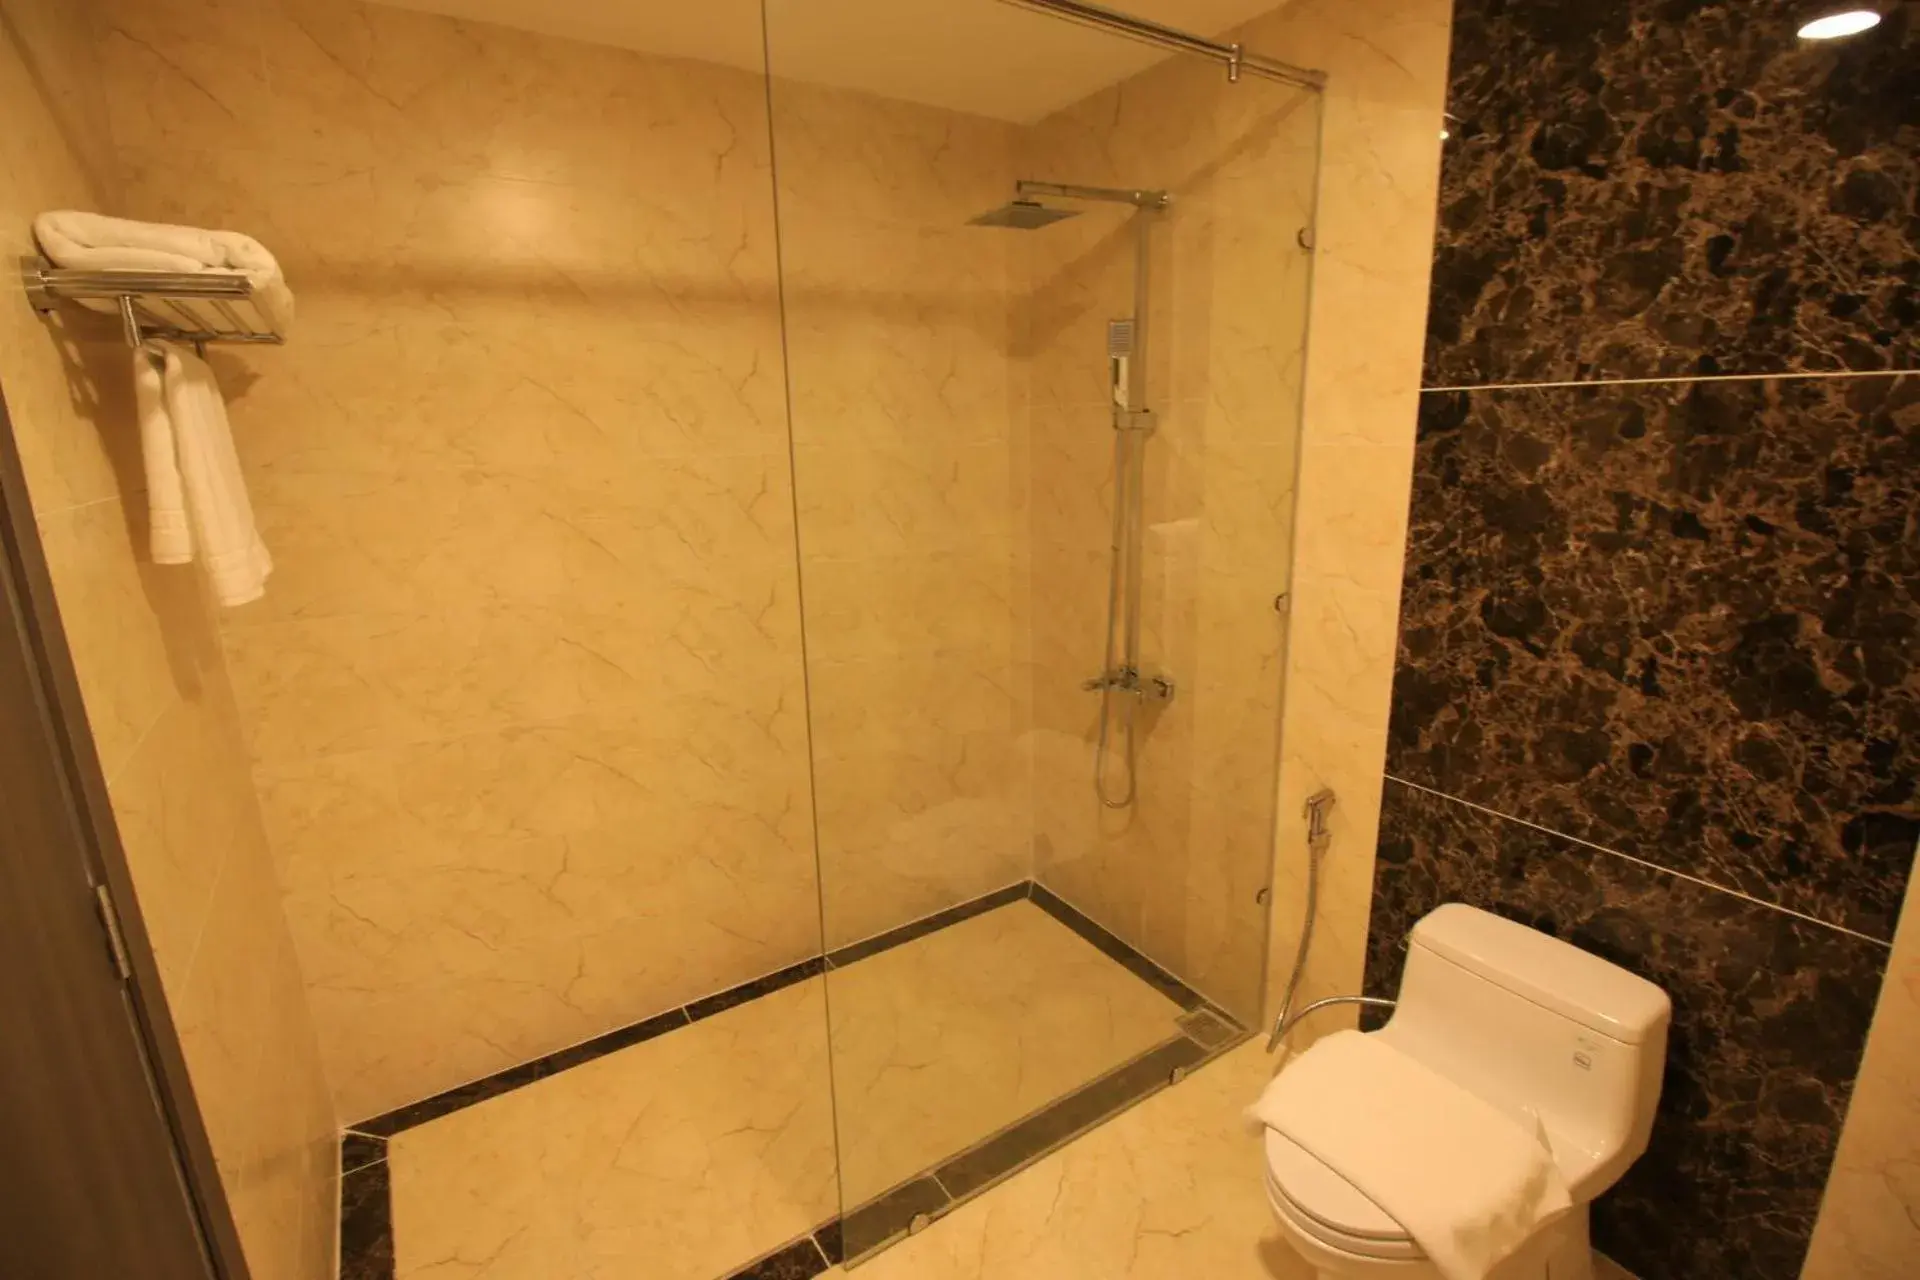 Bathroom in Muong Thanh Luxury Can Tho Hotel